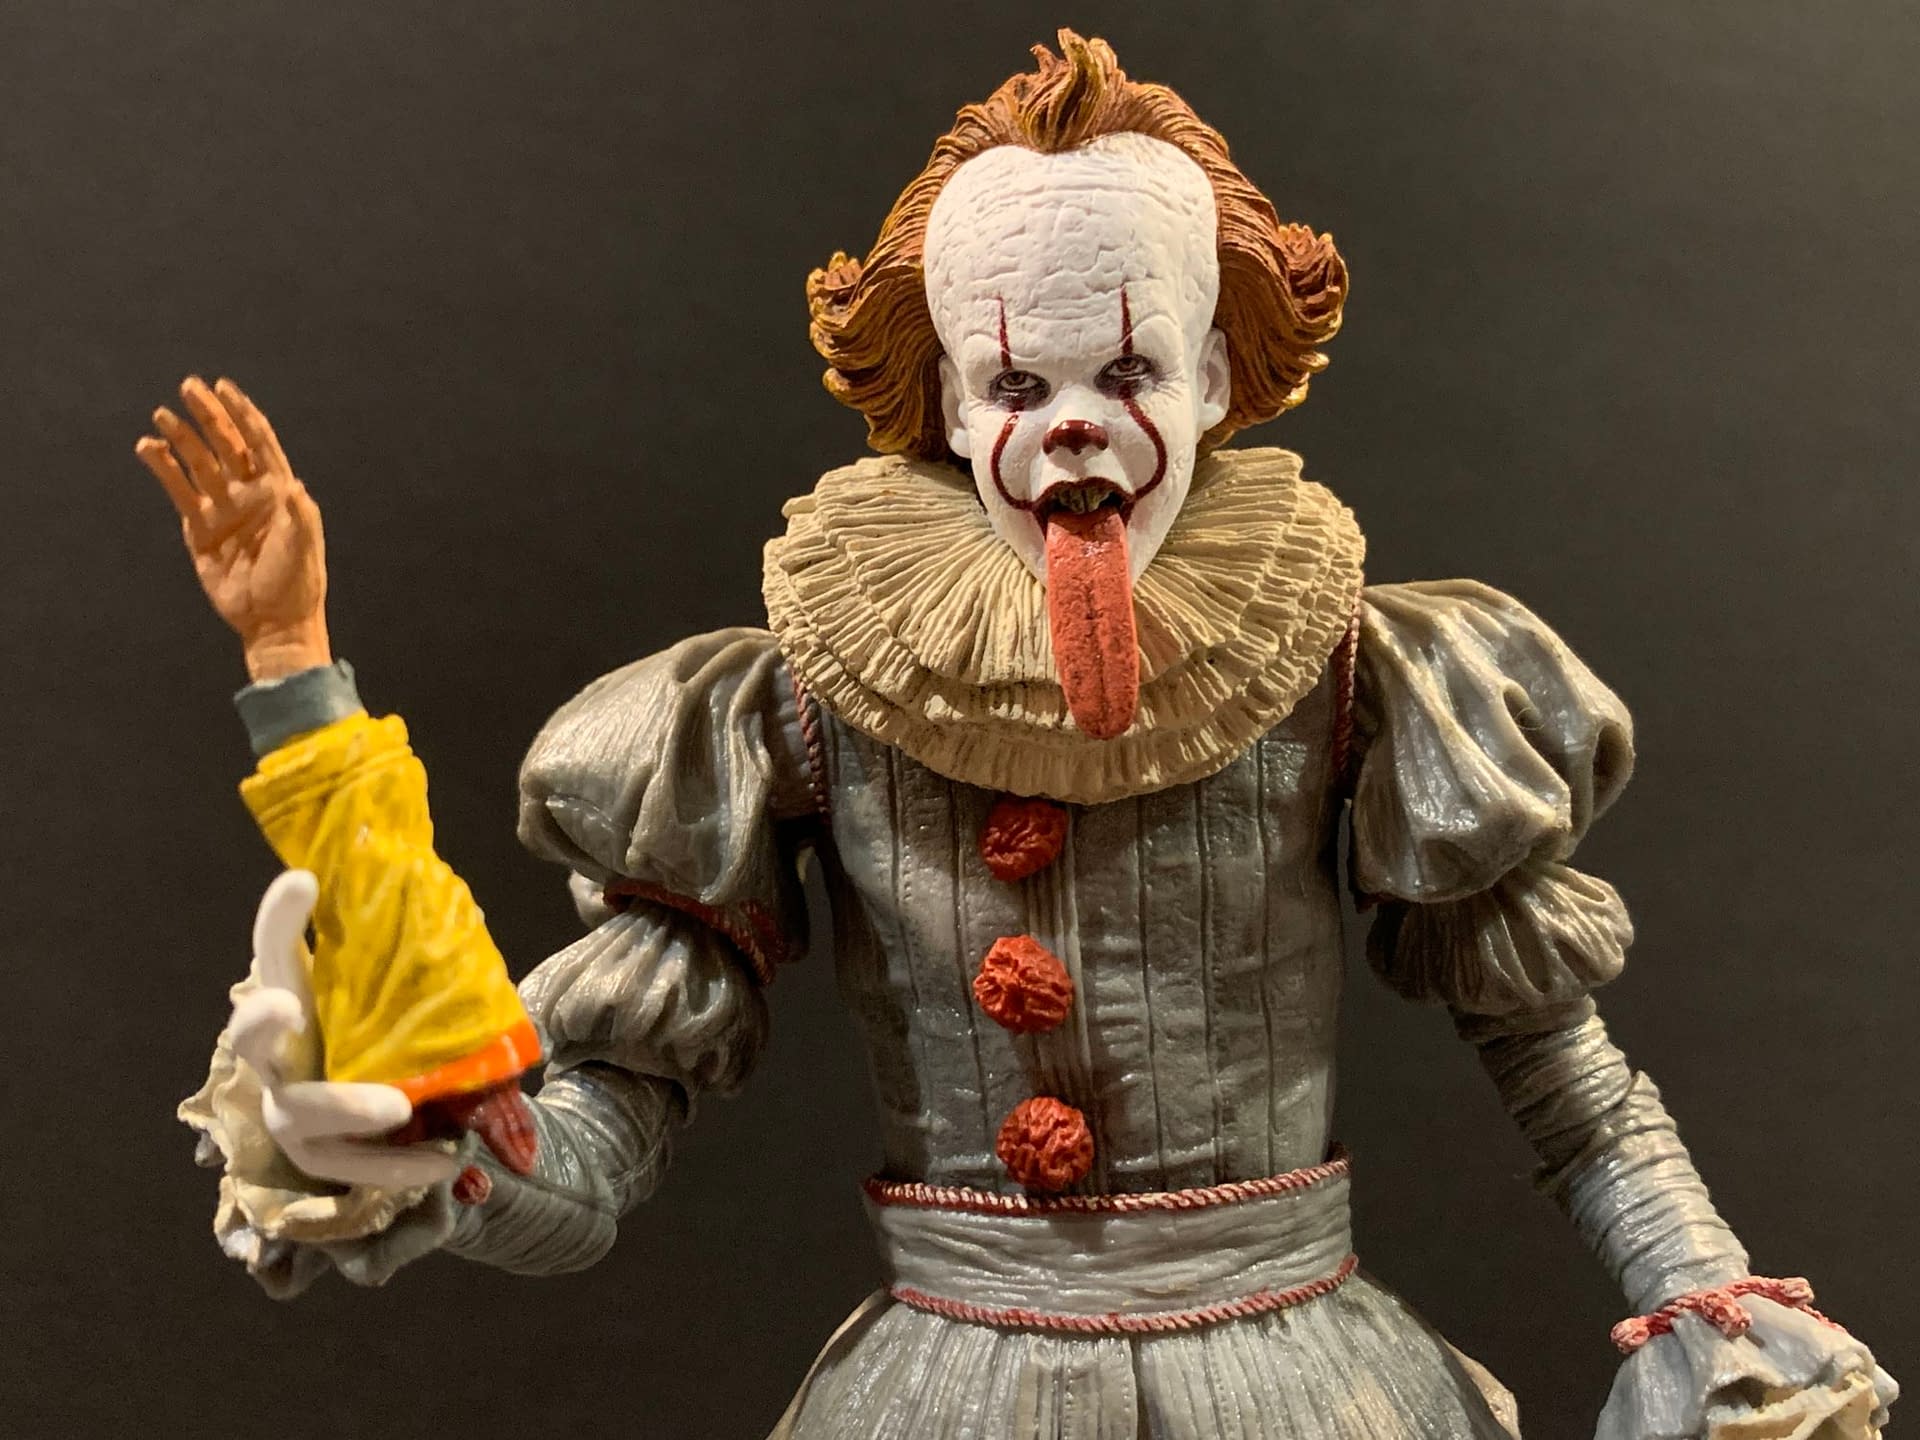 NECA Shows Us The Many Faces Of Pennywise The Dancing Clown